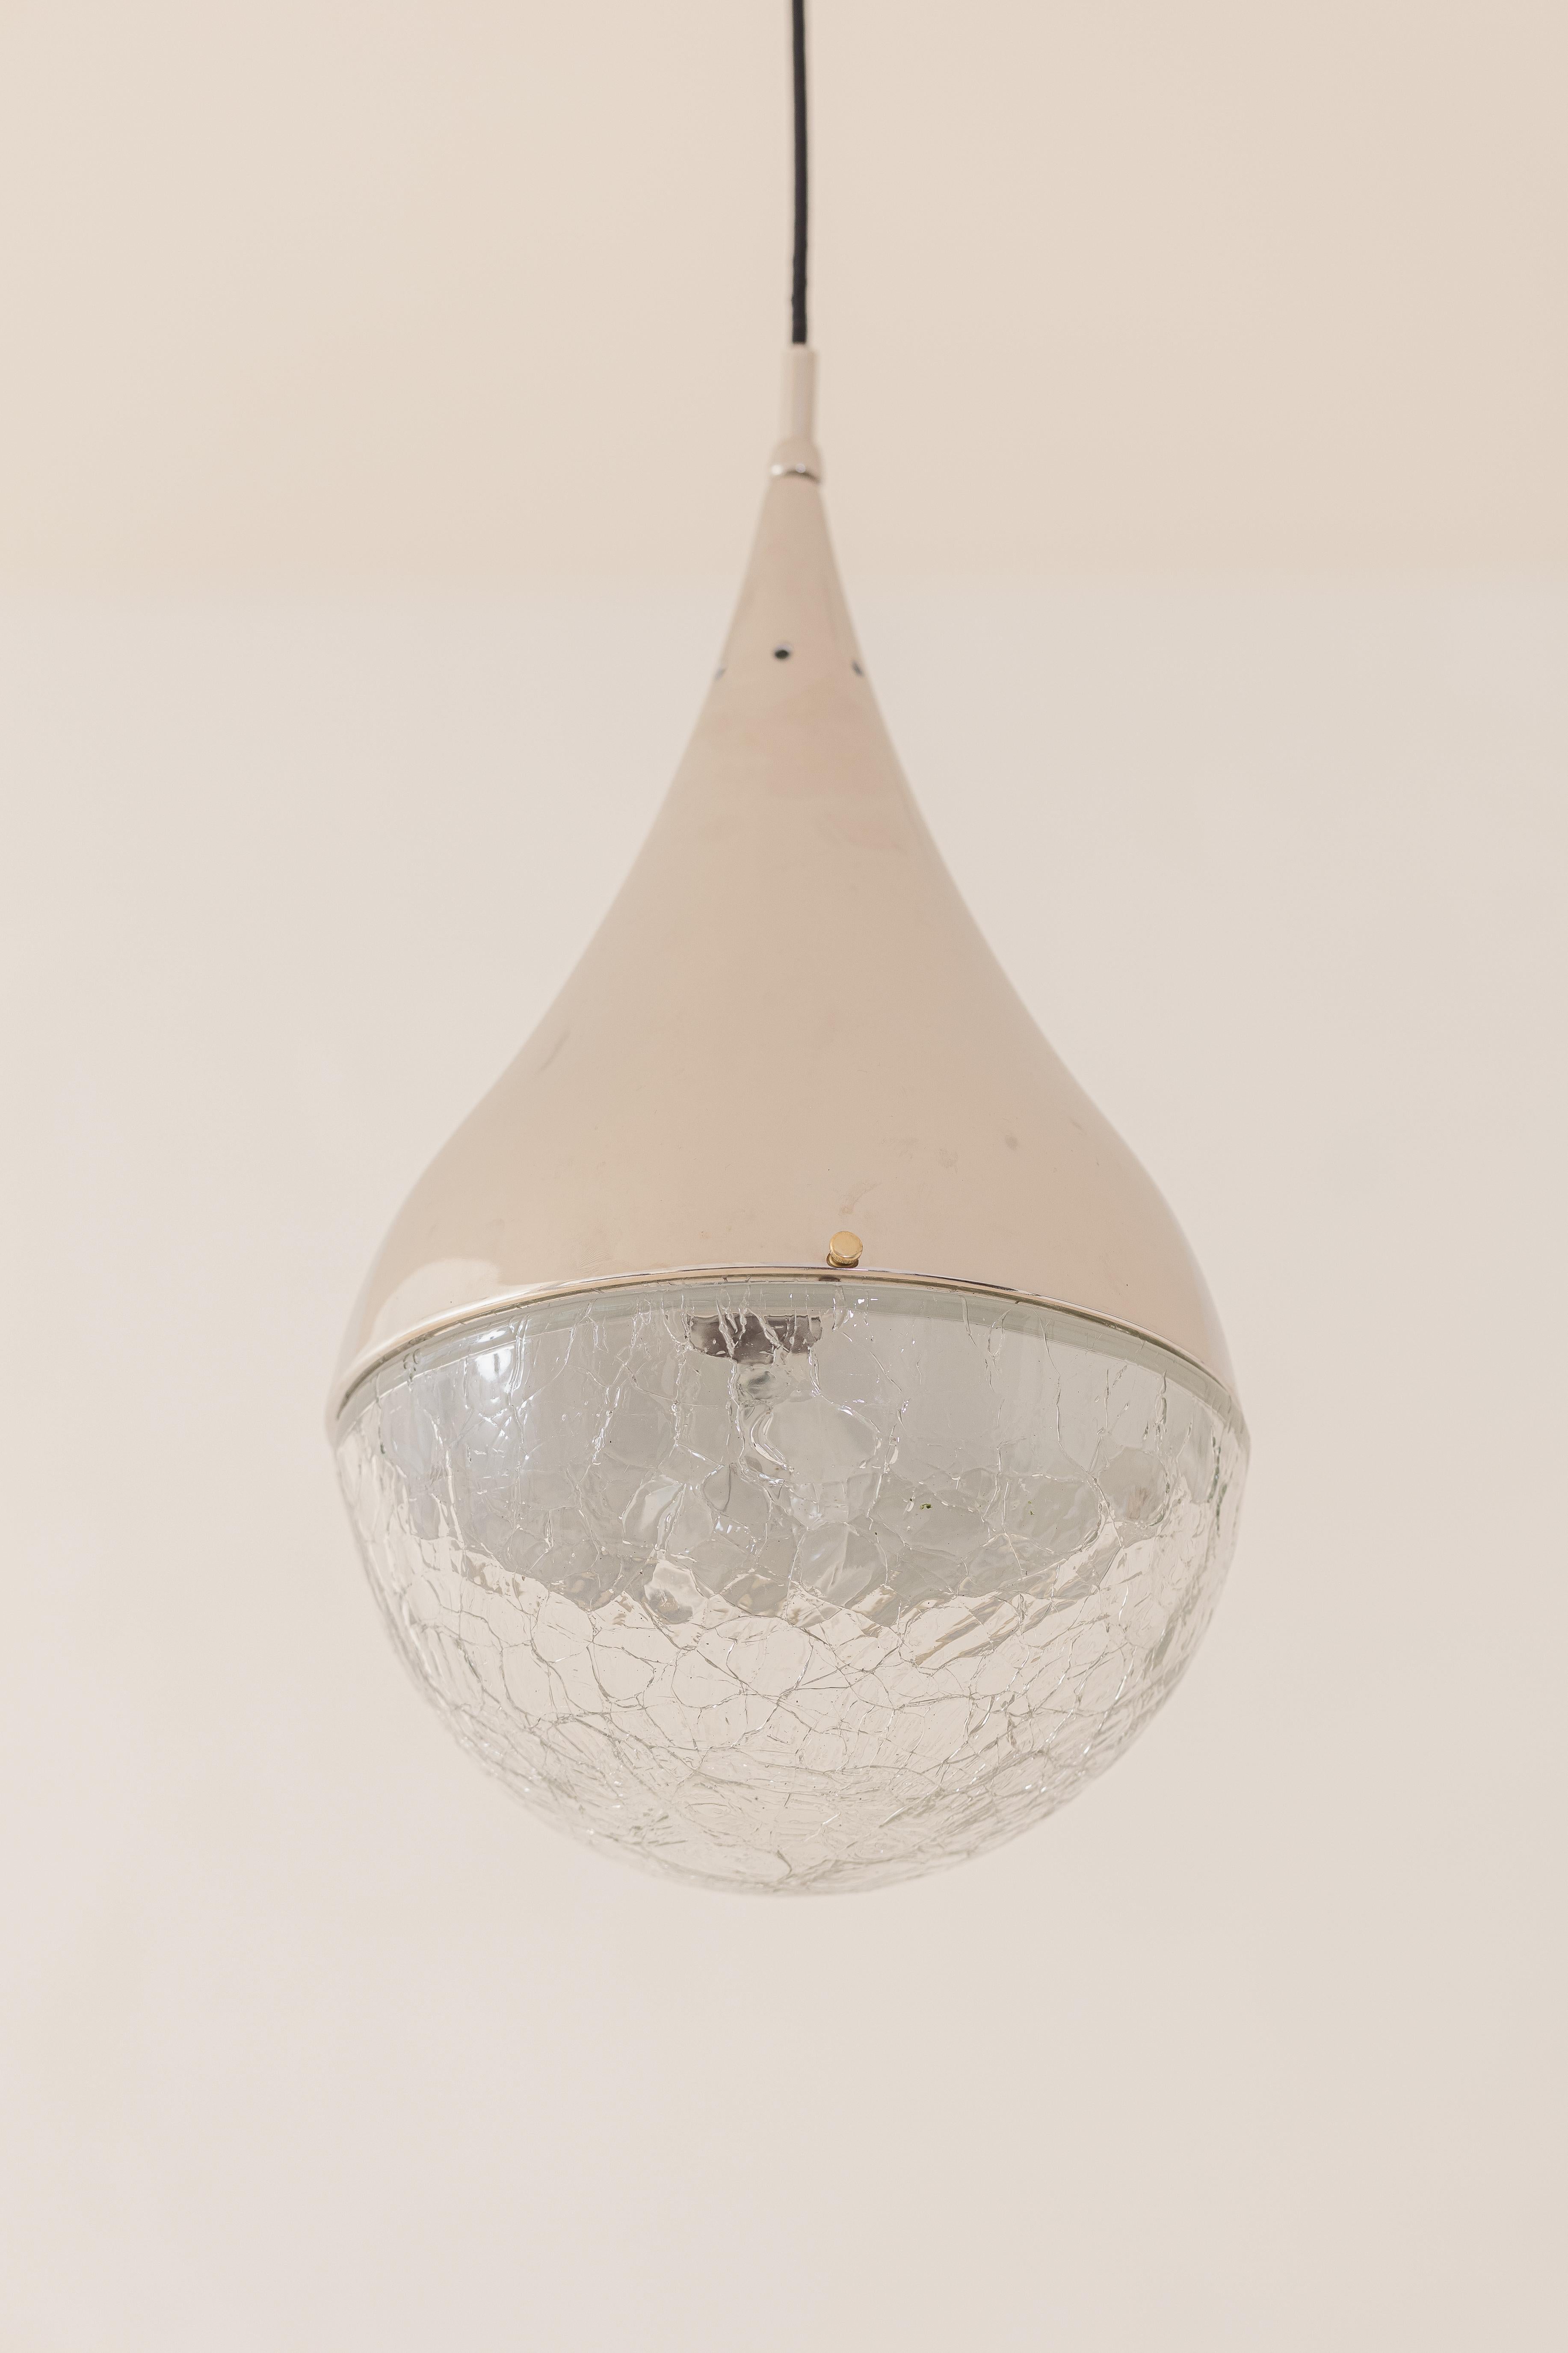 Mid-20th Century Vintage Pendant Lamp by Brazilian Carlo Montalto, Iron, Steel and Glass, 1960s For Sale